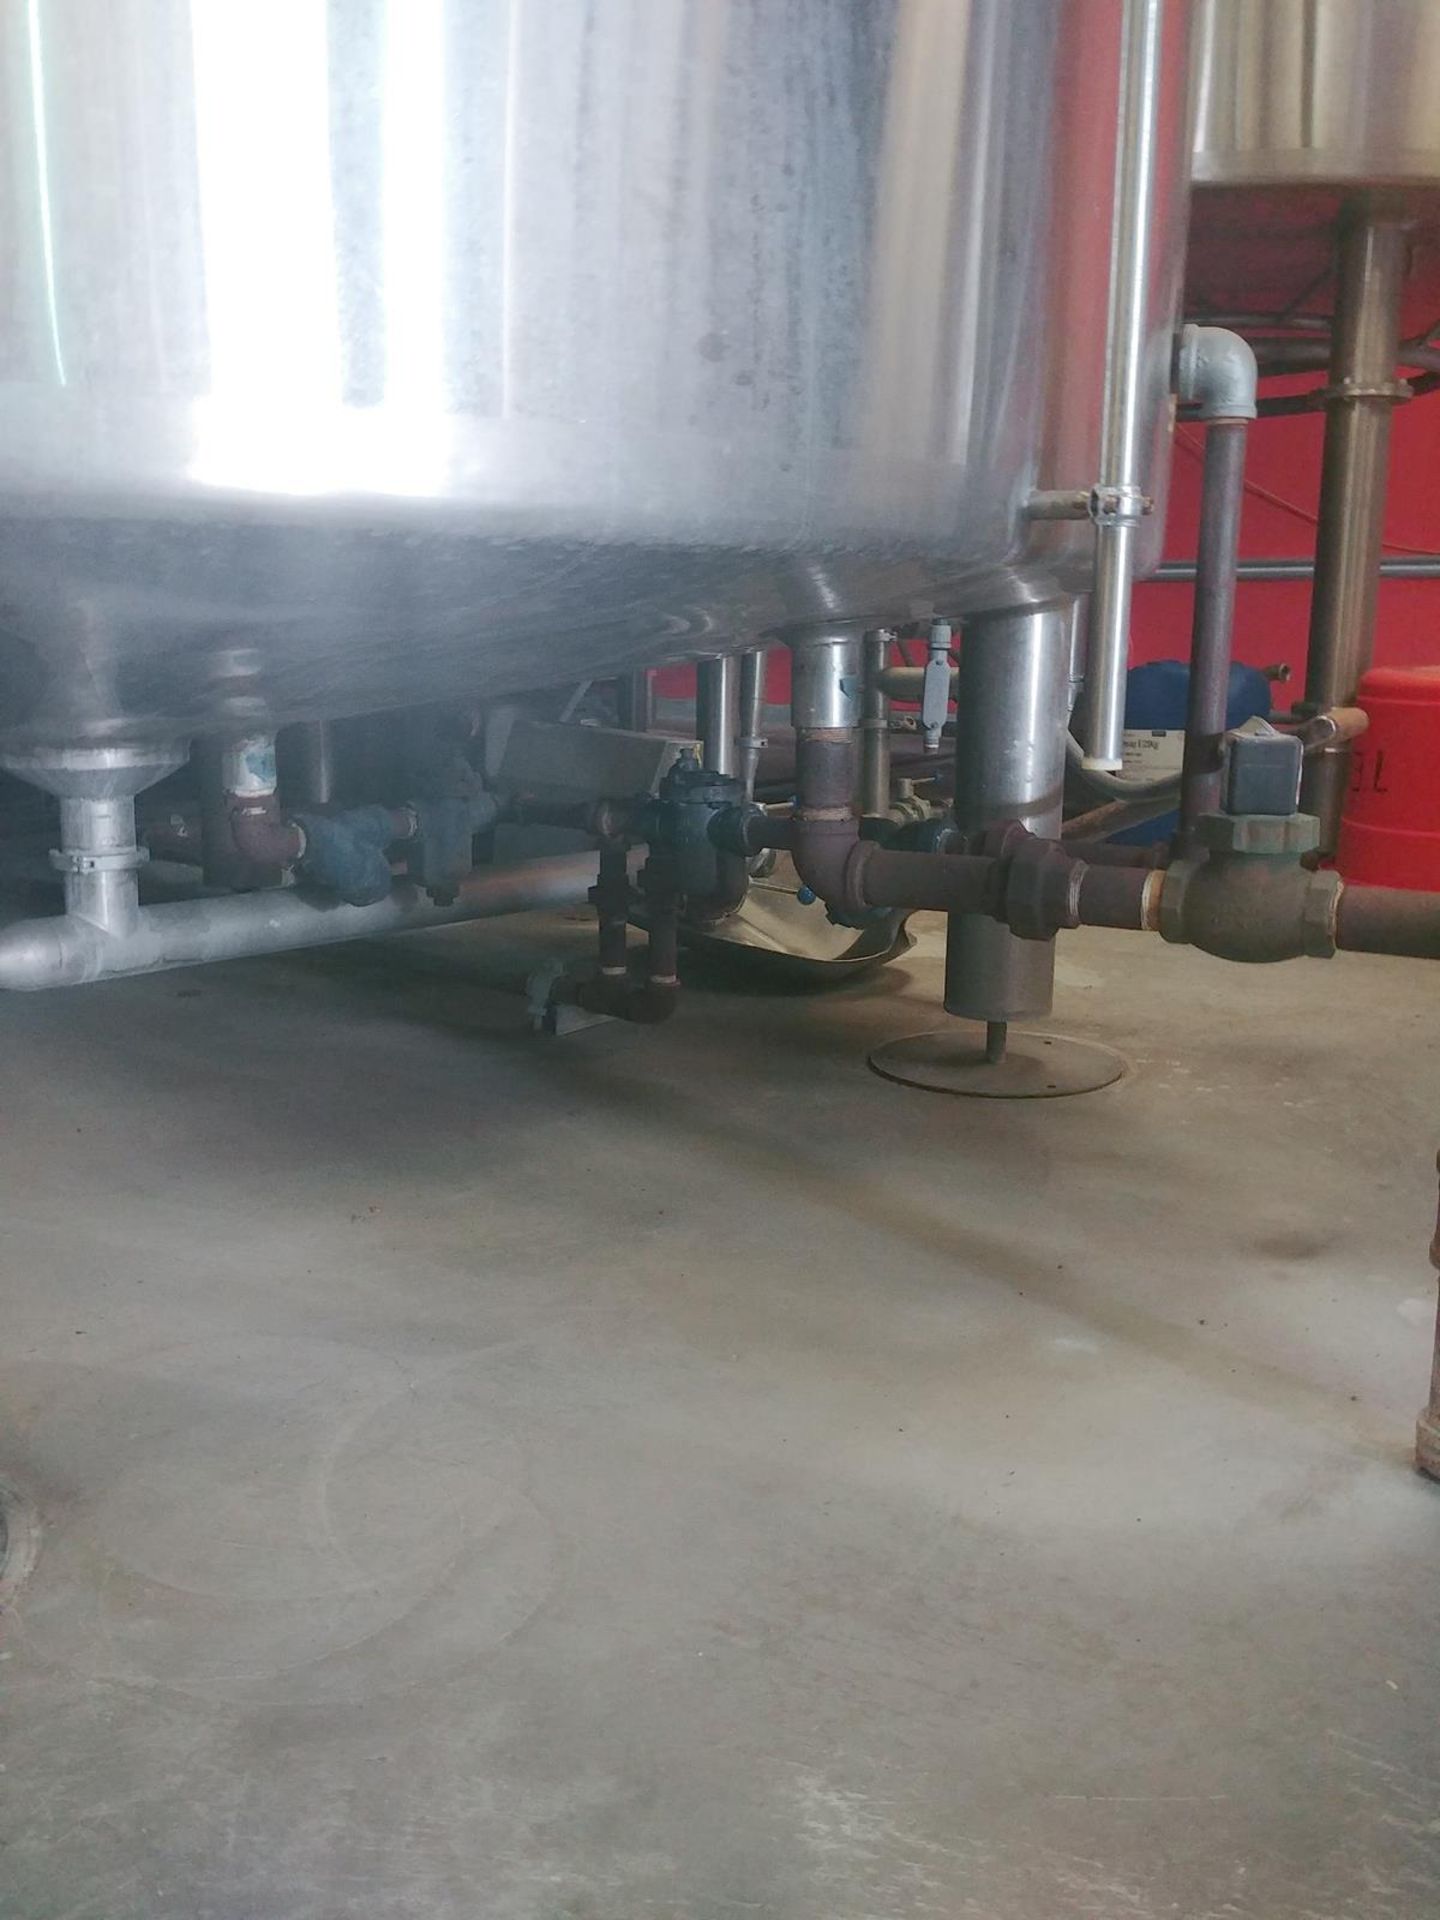 2013 Pacific Brewing 30 BBL 3-Vessel Brewhouse + Hot Liquor Tank - Sub to Bulk | Reqd Rig Fee: $6500 - Image 26 of 31